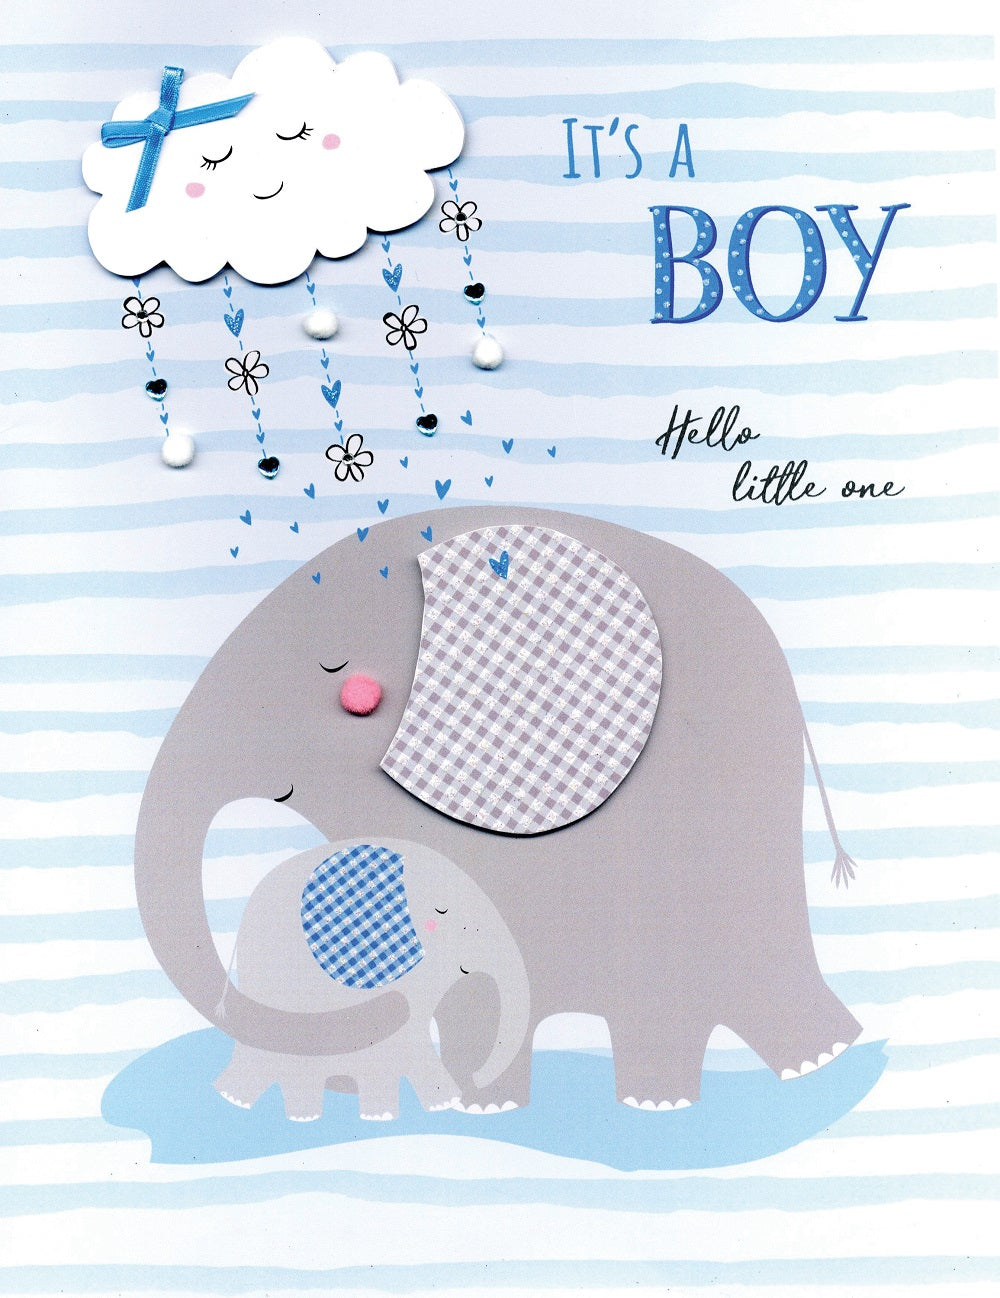 It's A Boy Hello Little One Gigantic Greeting Card  A4 Sized Cards